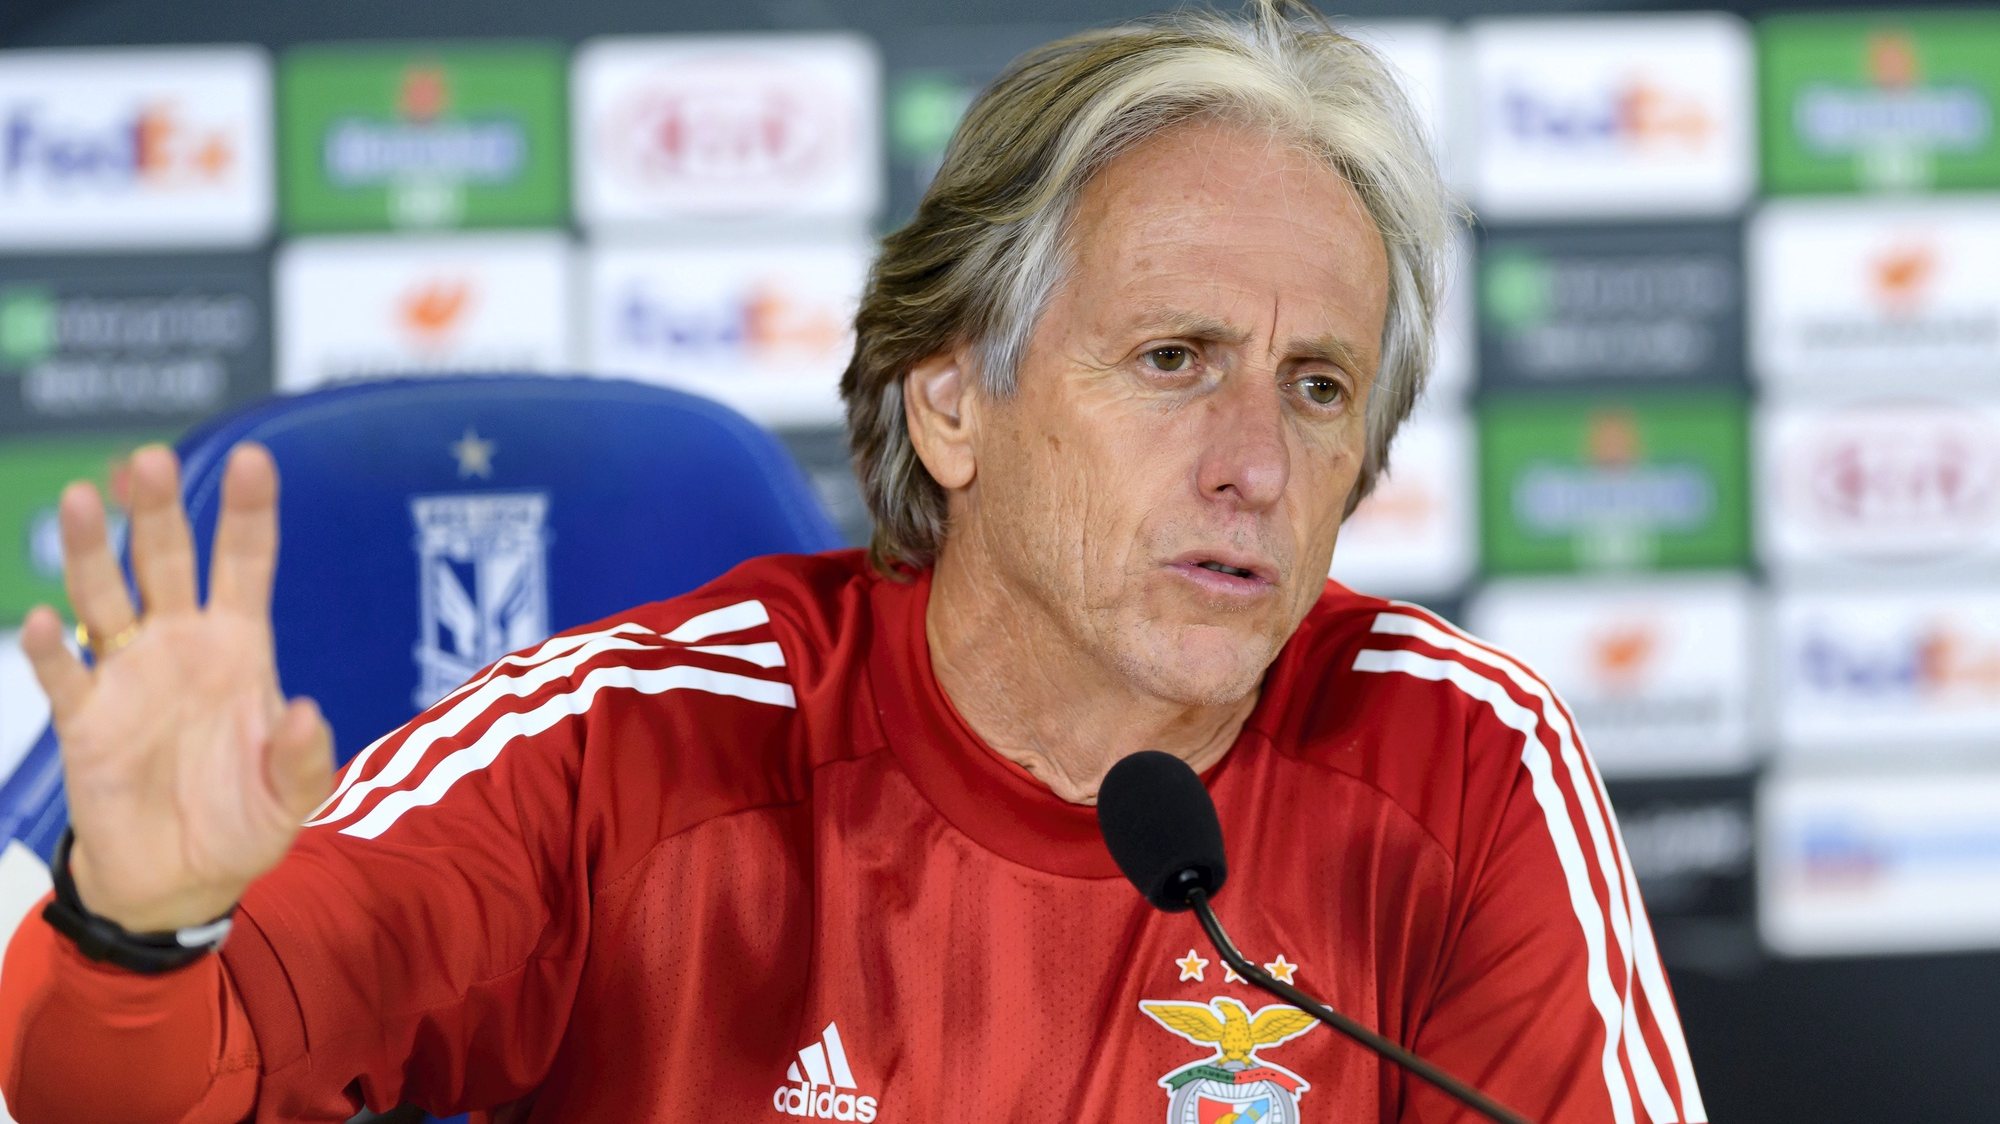 epa08762695 SL Benfica&#039;s head coach Jorge Jesus during a press conference in Poznan, central Poland, 21 October 2020. SL Benfica faces Lech Poznan for an UEFA Europa League group D match on 22 October in Poznan.  EPA/Jakub Kaczmarczyk POLAND OUT